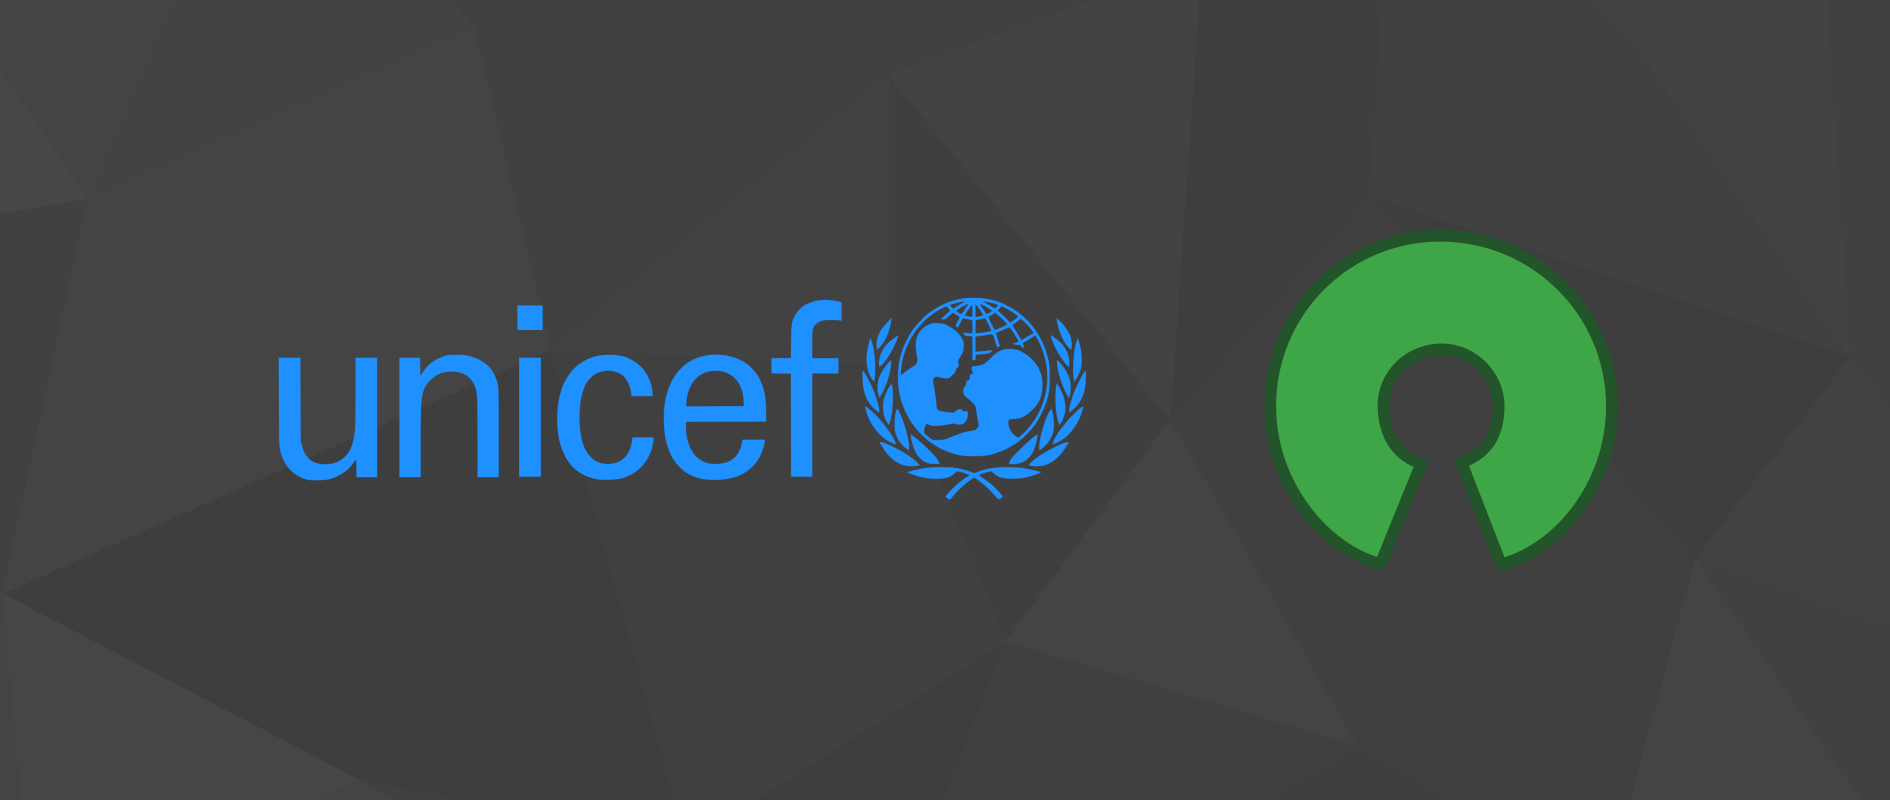 The UNICEF Office of Innovation releases software under free and open source licenses